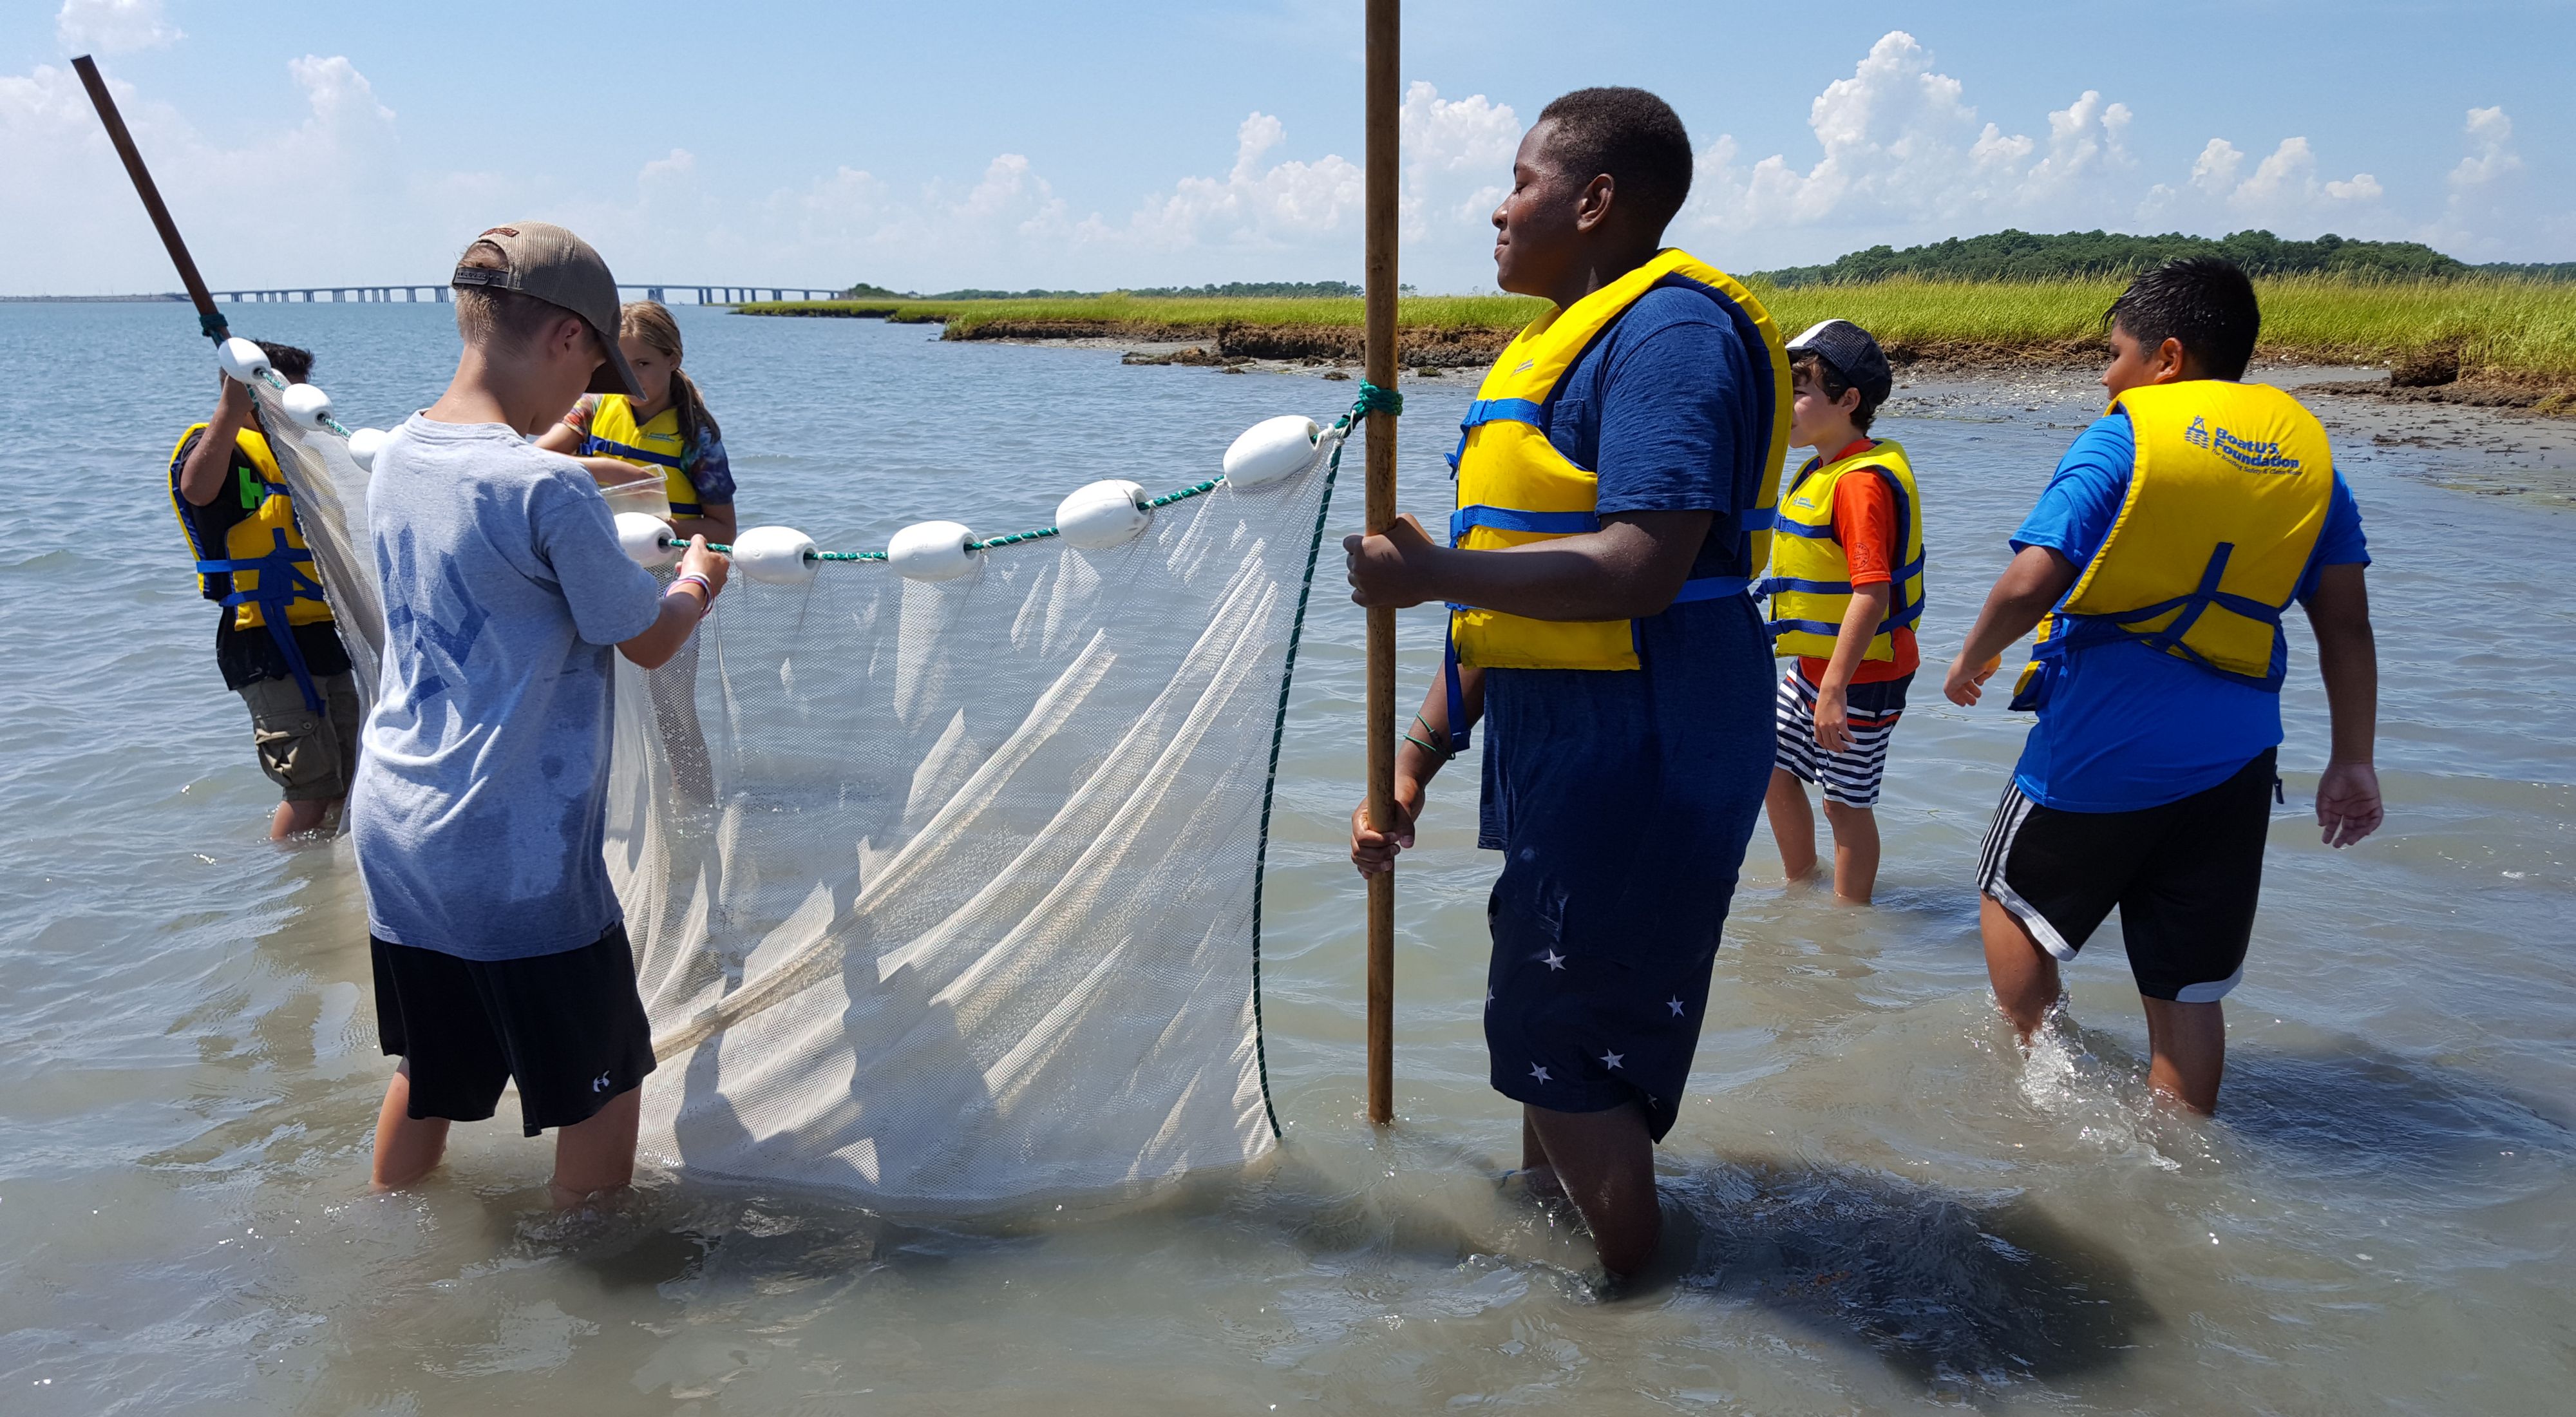 TNC's VVCR Education Program participants wear life jackets while working together in the water on the Eastern Shore. 